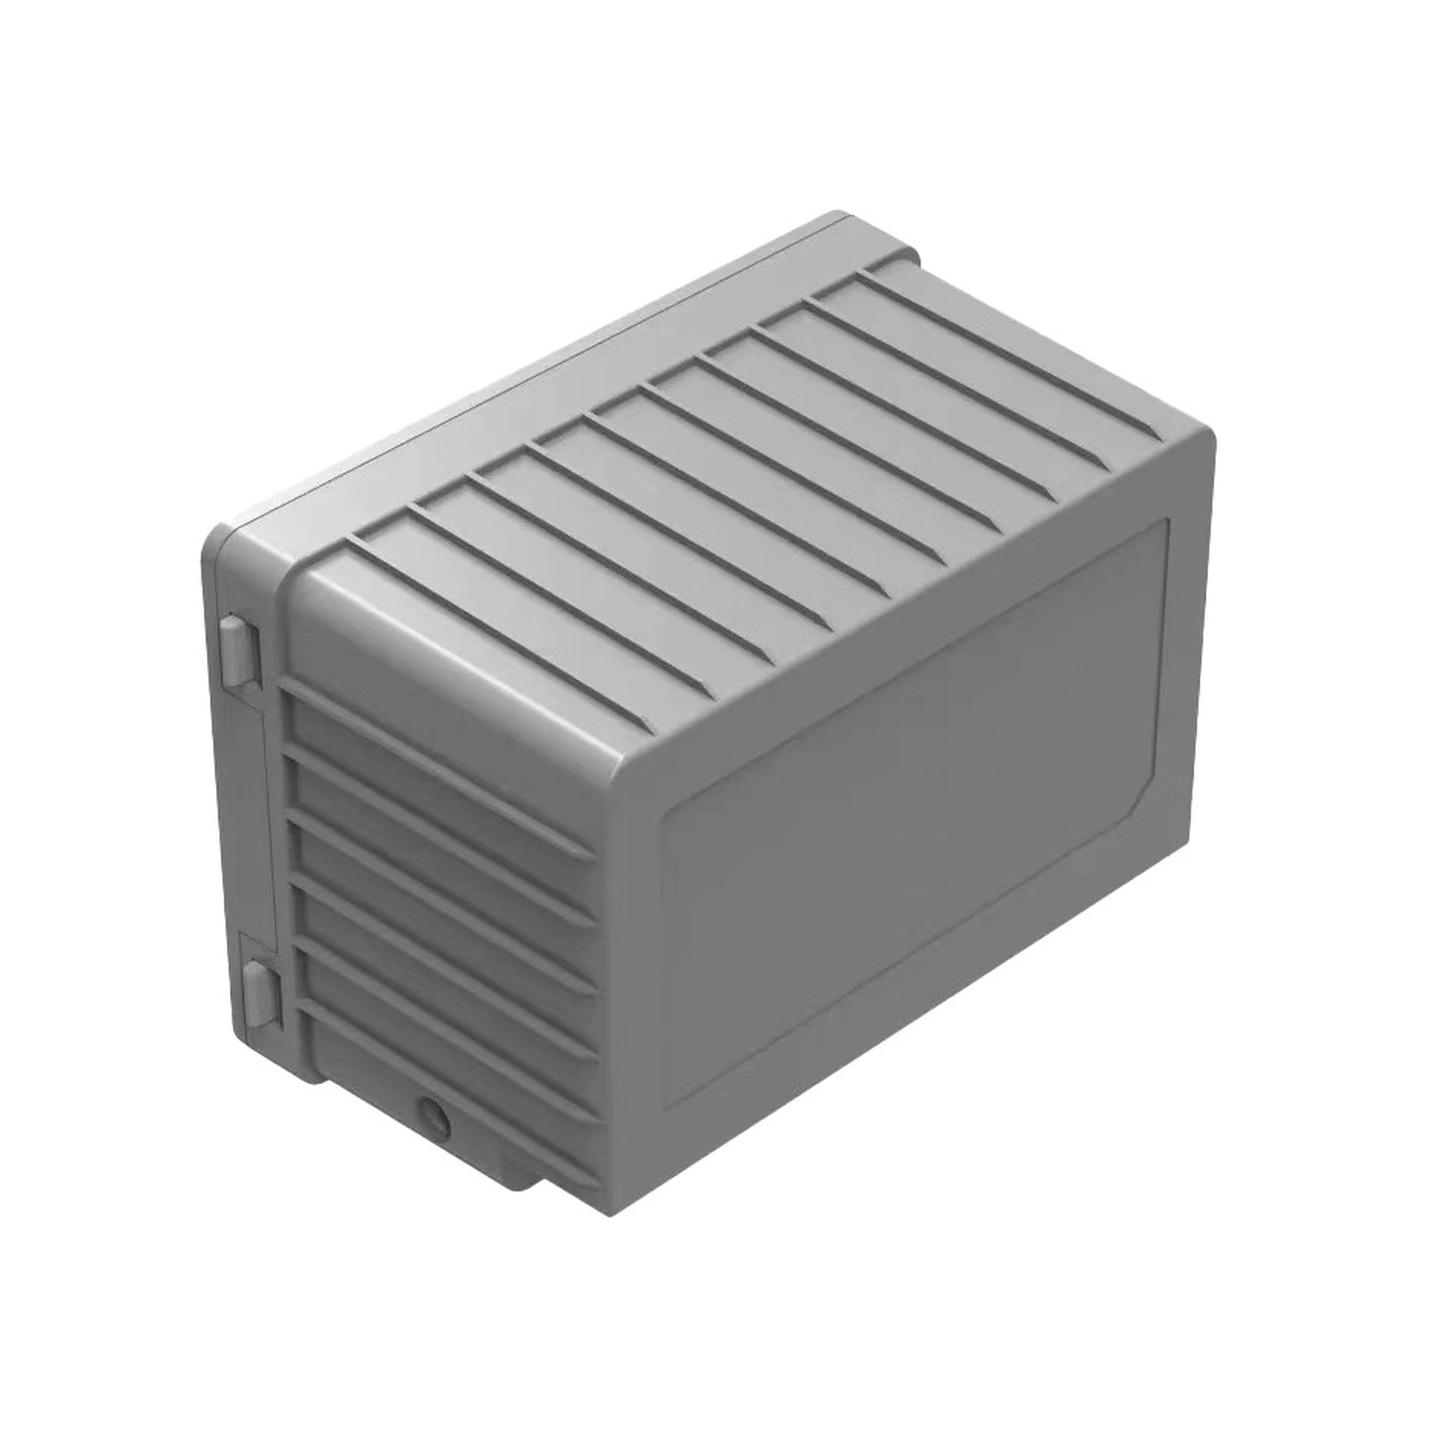 15.6Ah Removable Lithium Battery Version 3 to Suit Brass Monkey Fridge/Freezers with Battery Support